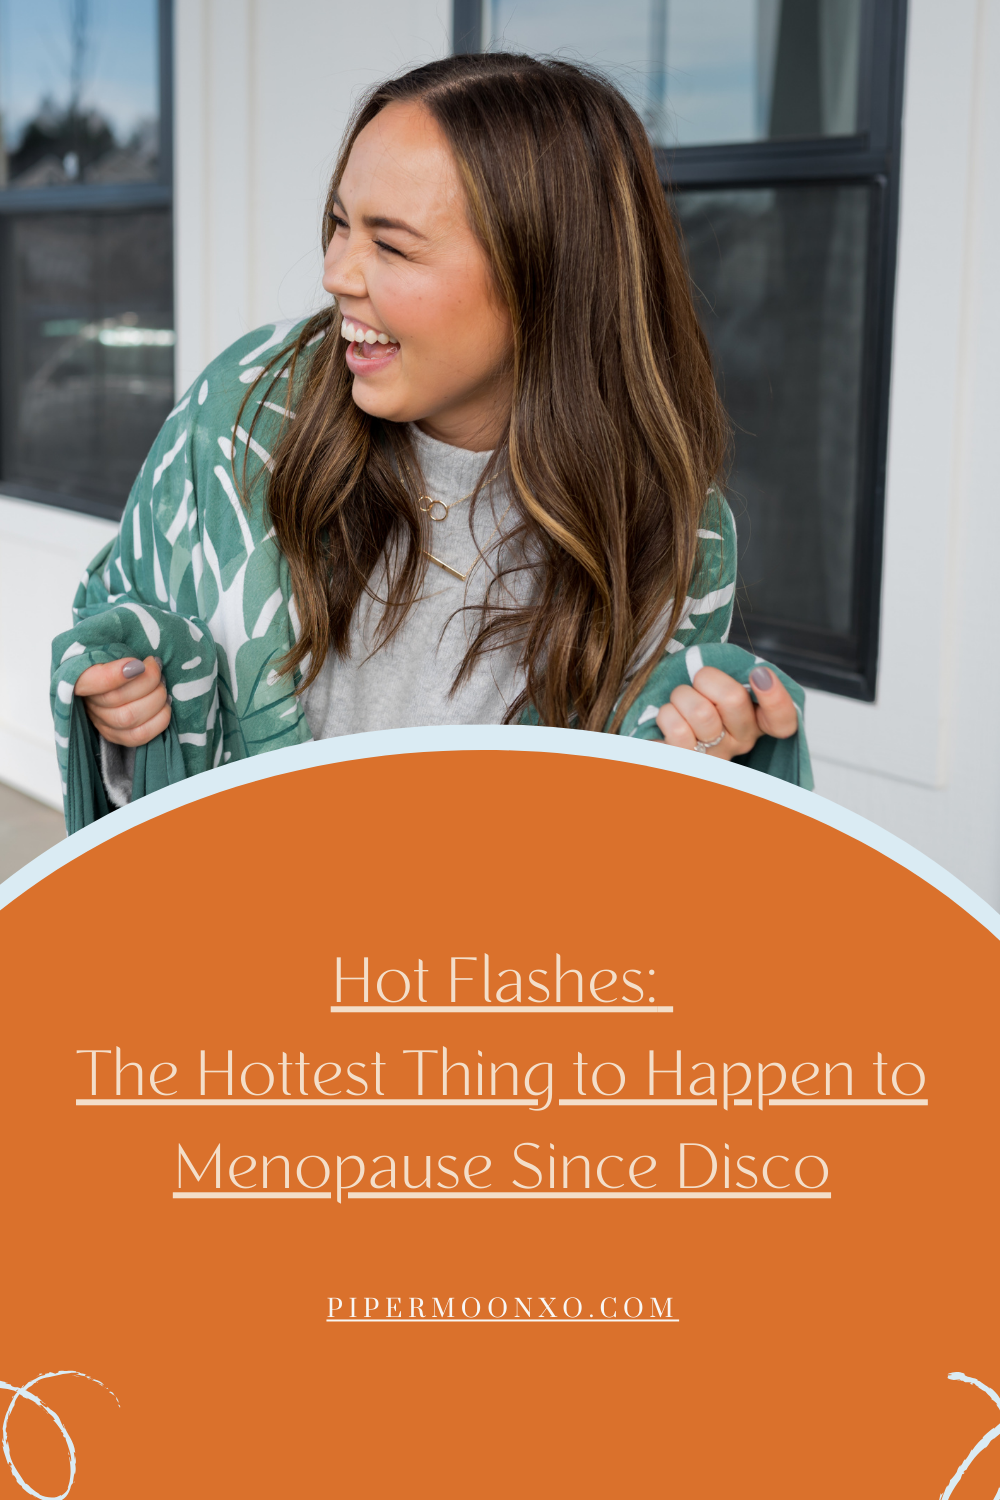 Hot Flashes: The Hottest Thing to Happen to Menopause Since Disco